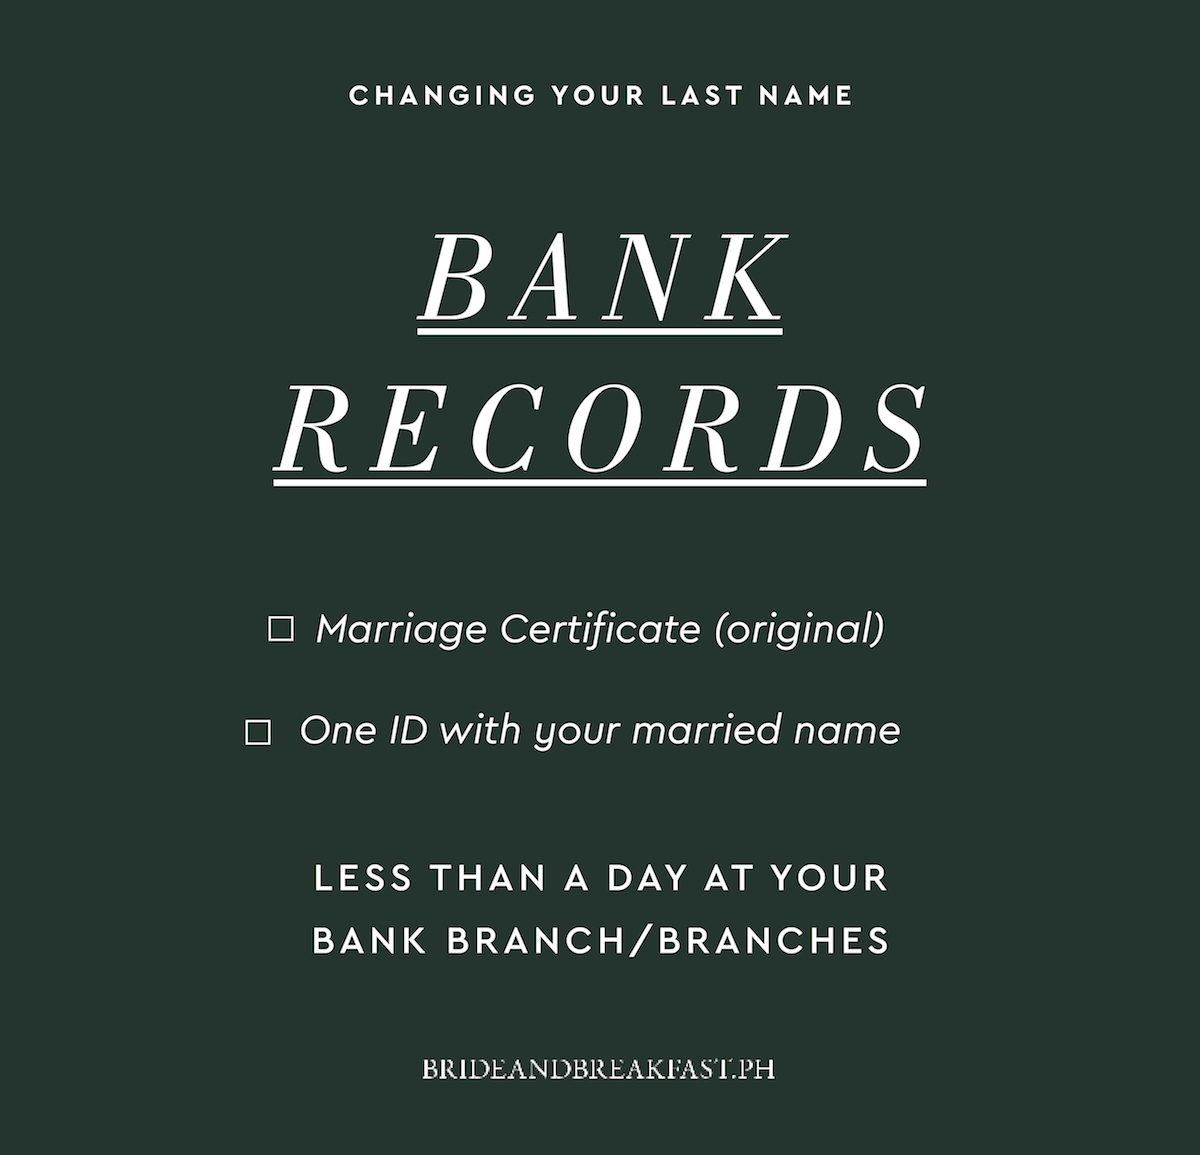 3. Bank Records Marriage Certificate (original) One ID with your married name Less than a day at your bank branch/branches